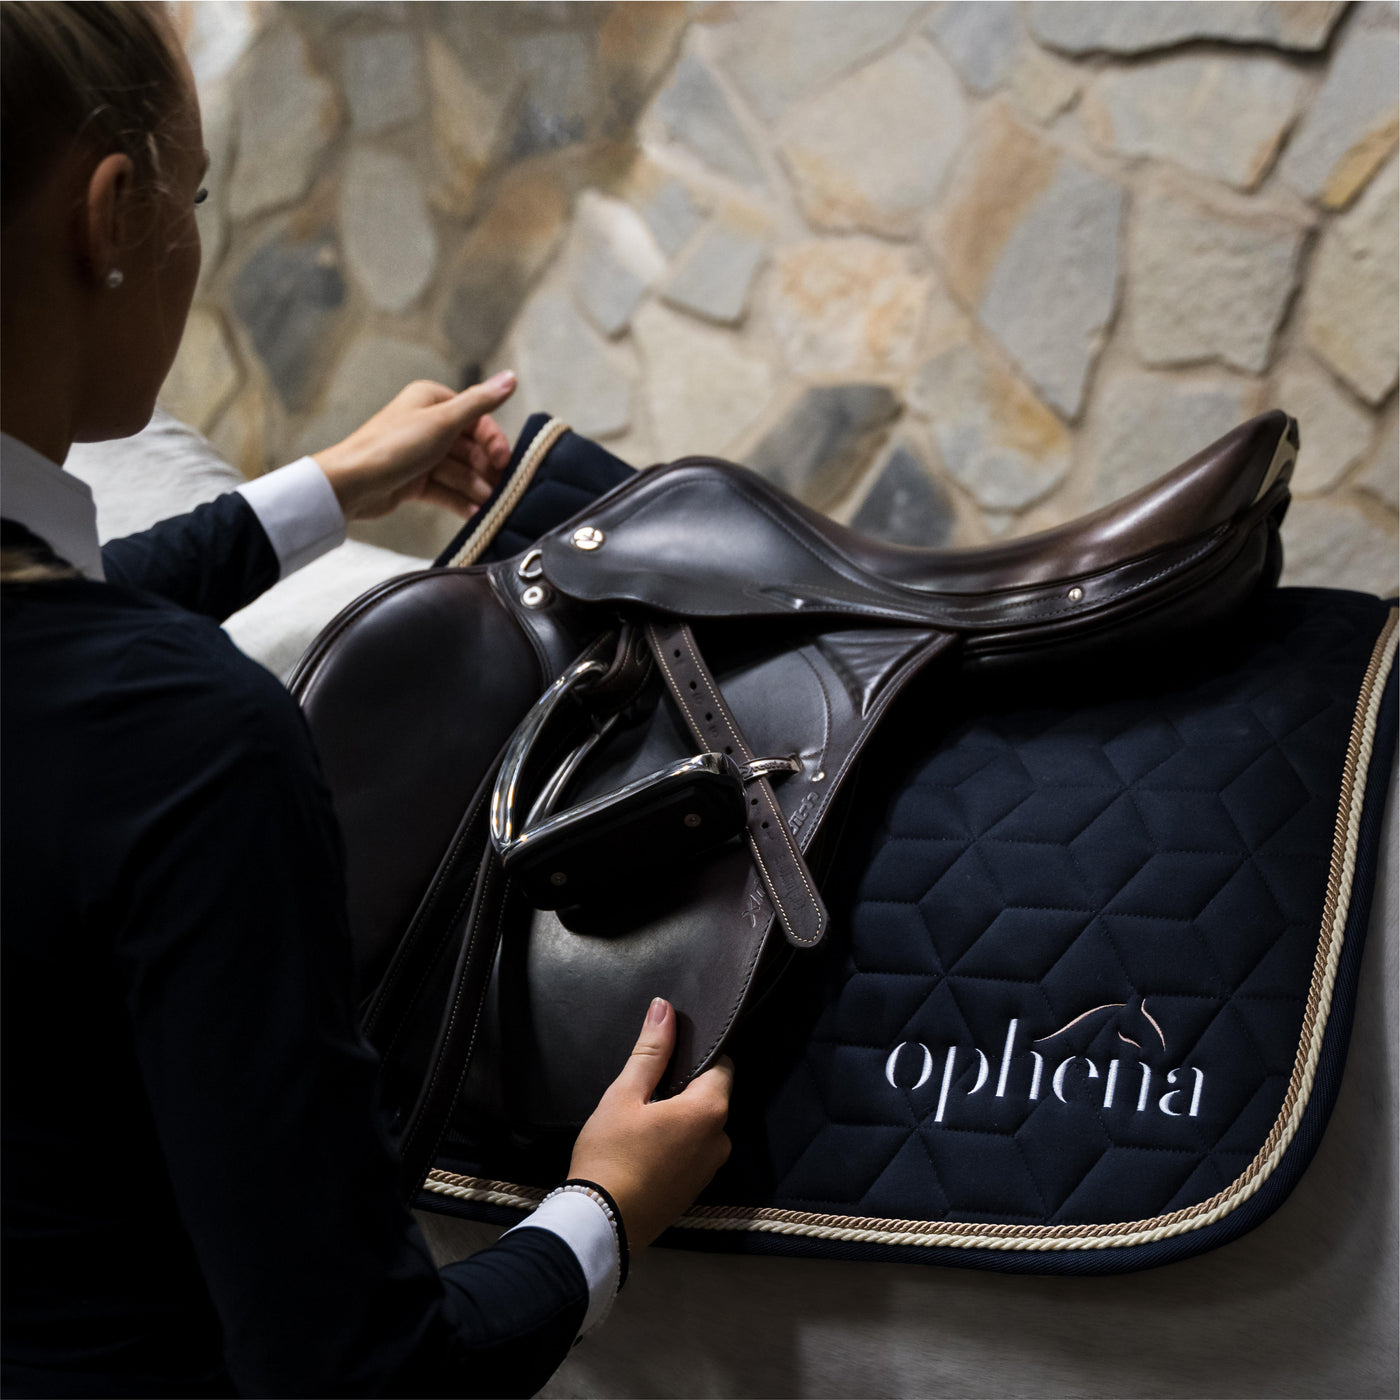 Rider fixing her saddle, fitted with an Ophena Saddle Pad and Ophena S stirrups